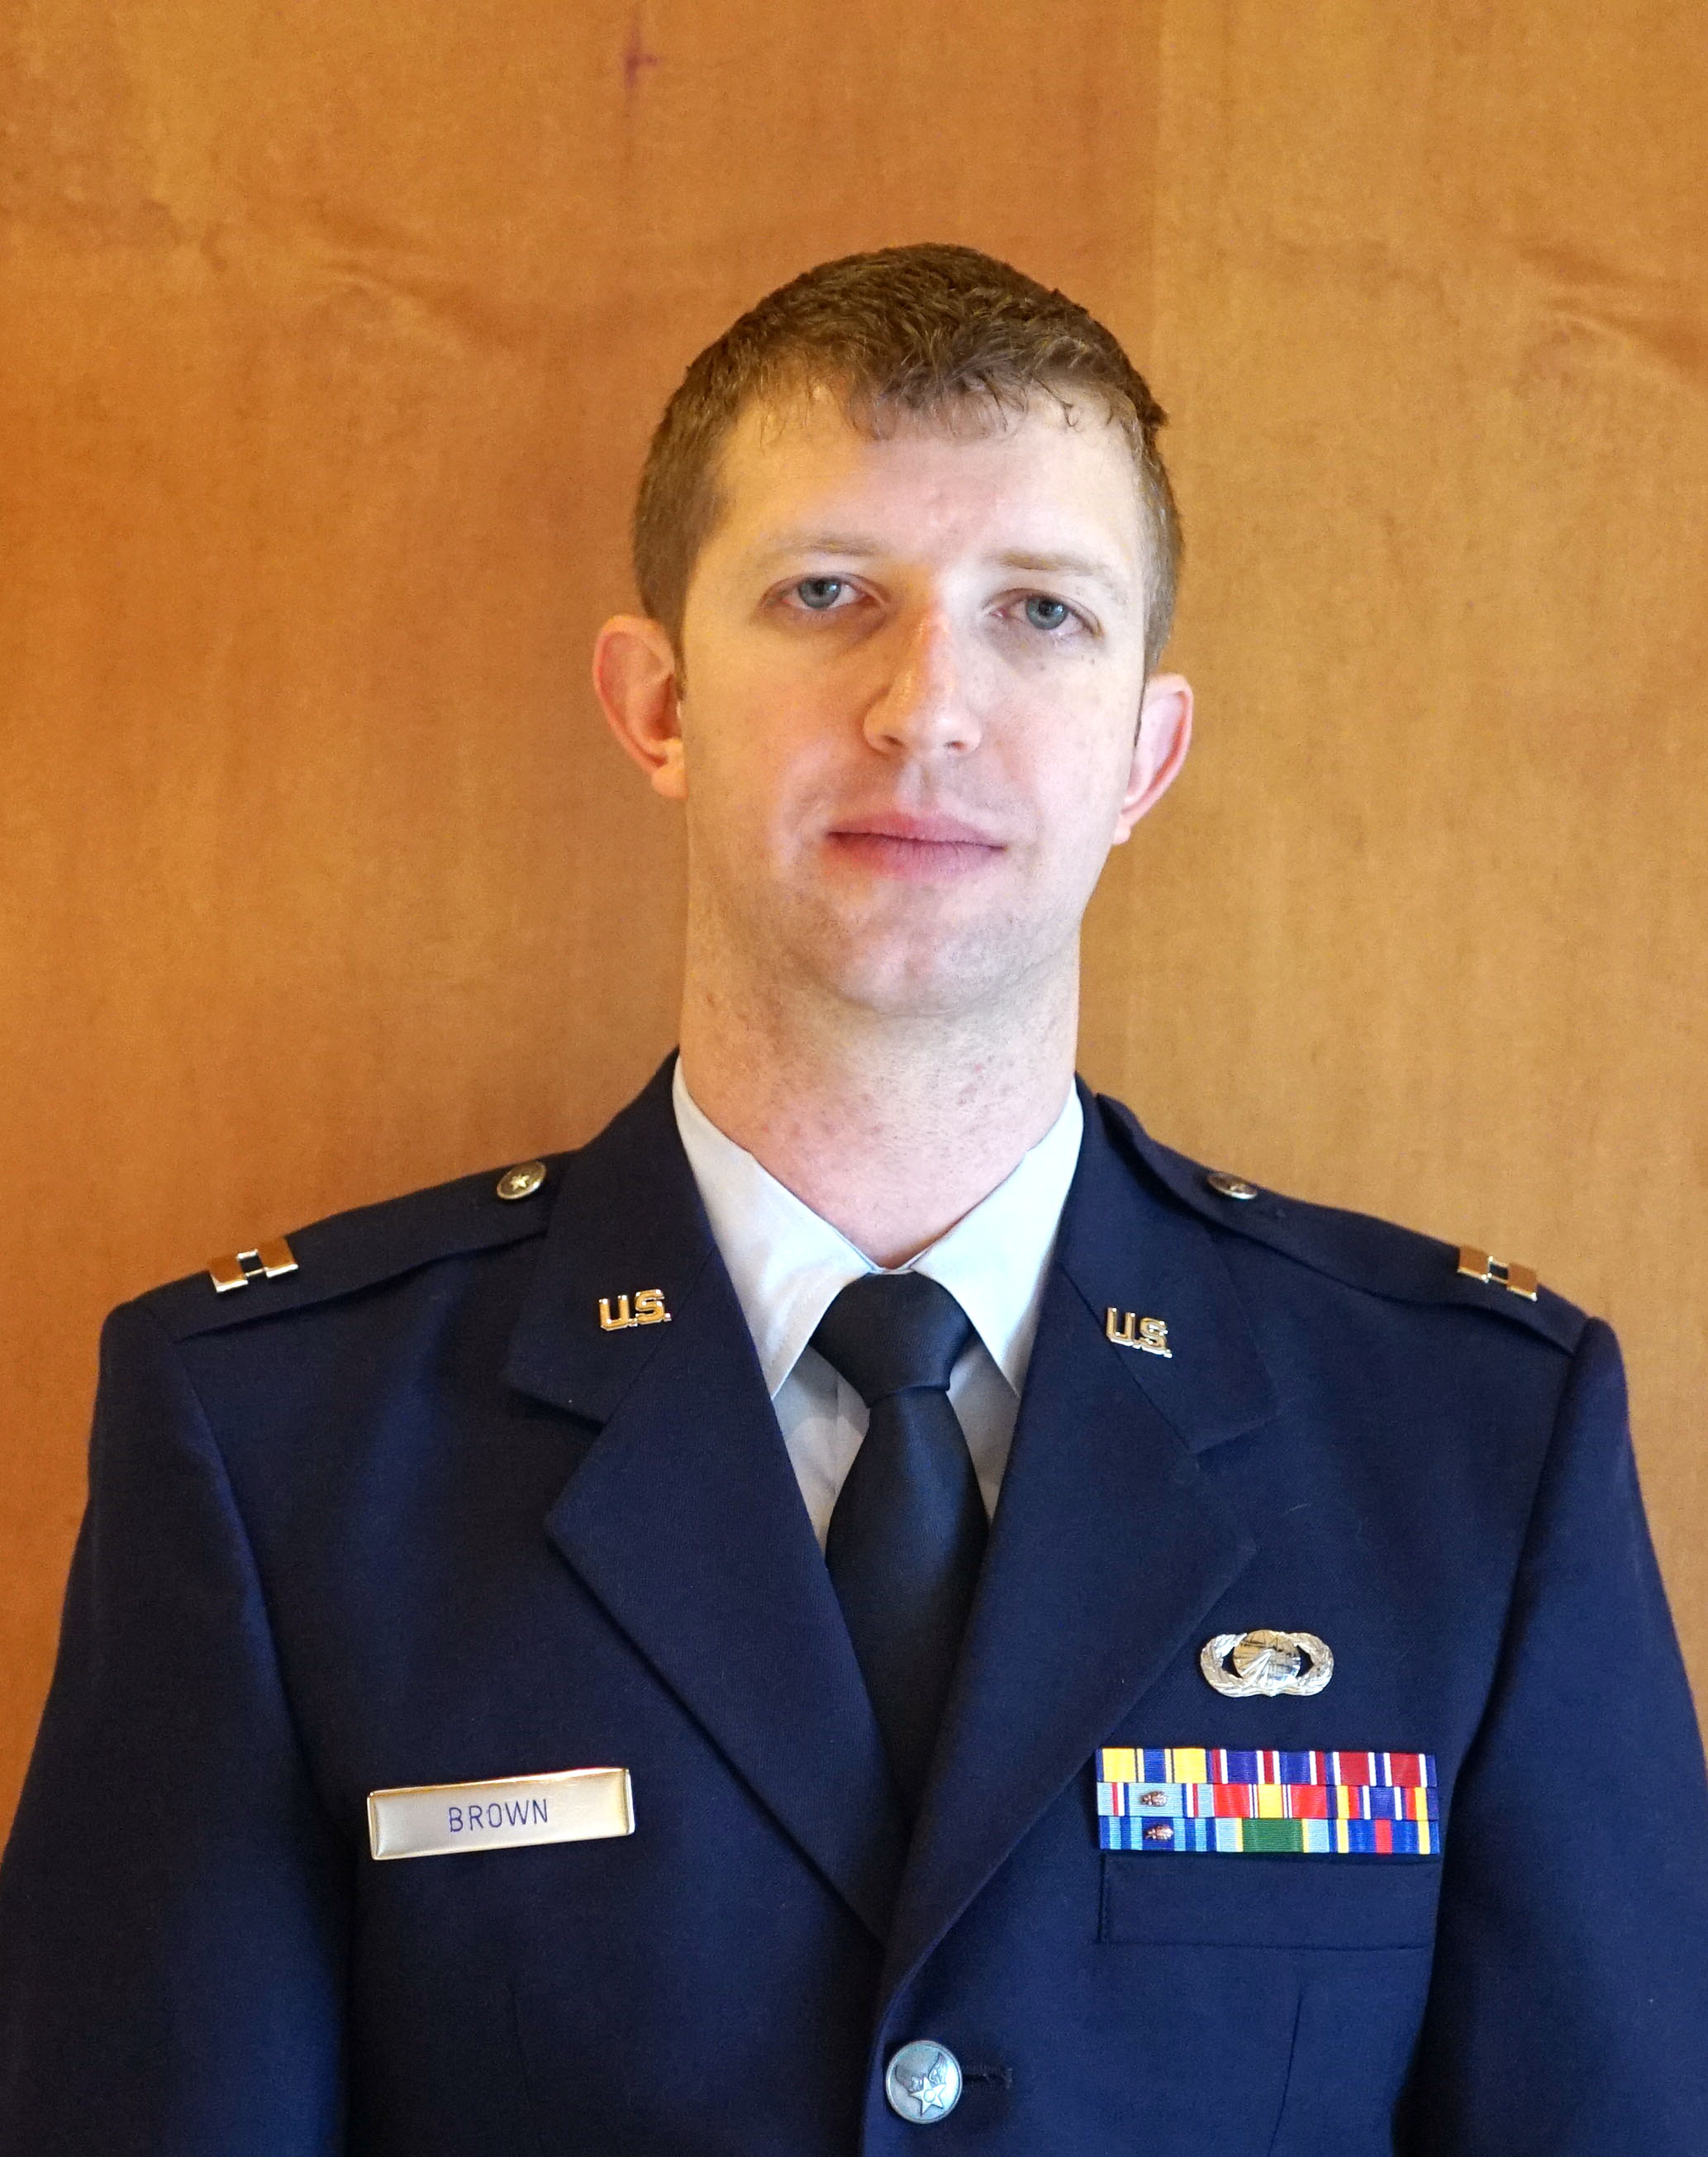 Photo of Capt Michael J. Brown, USAF in service dress